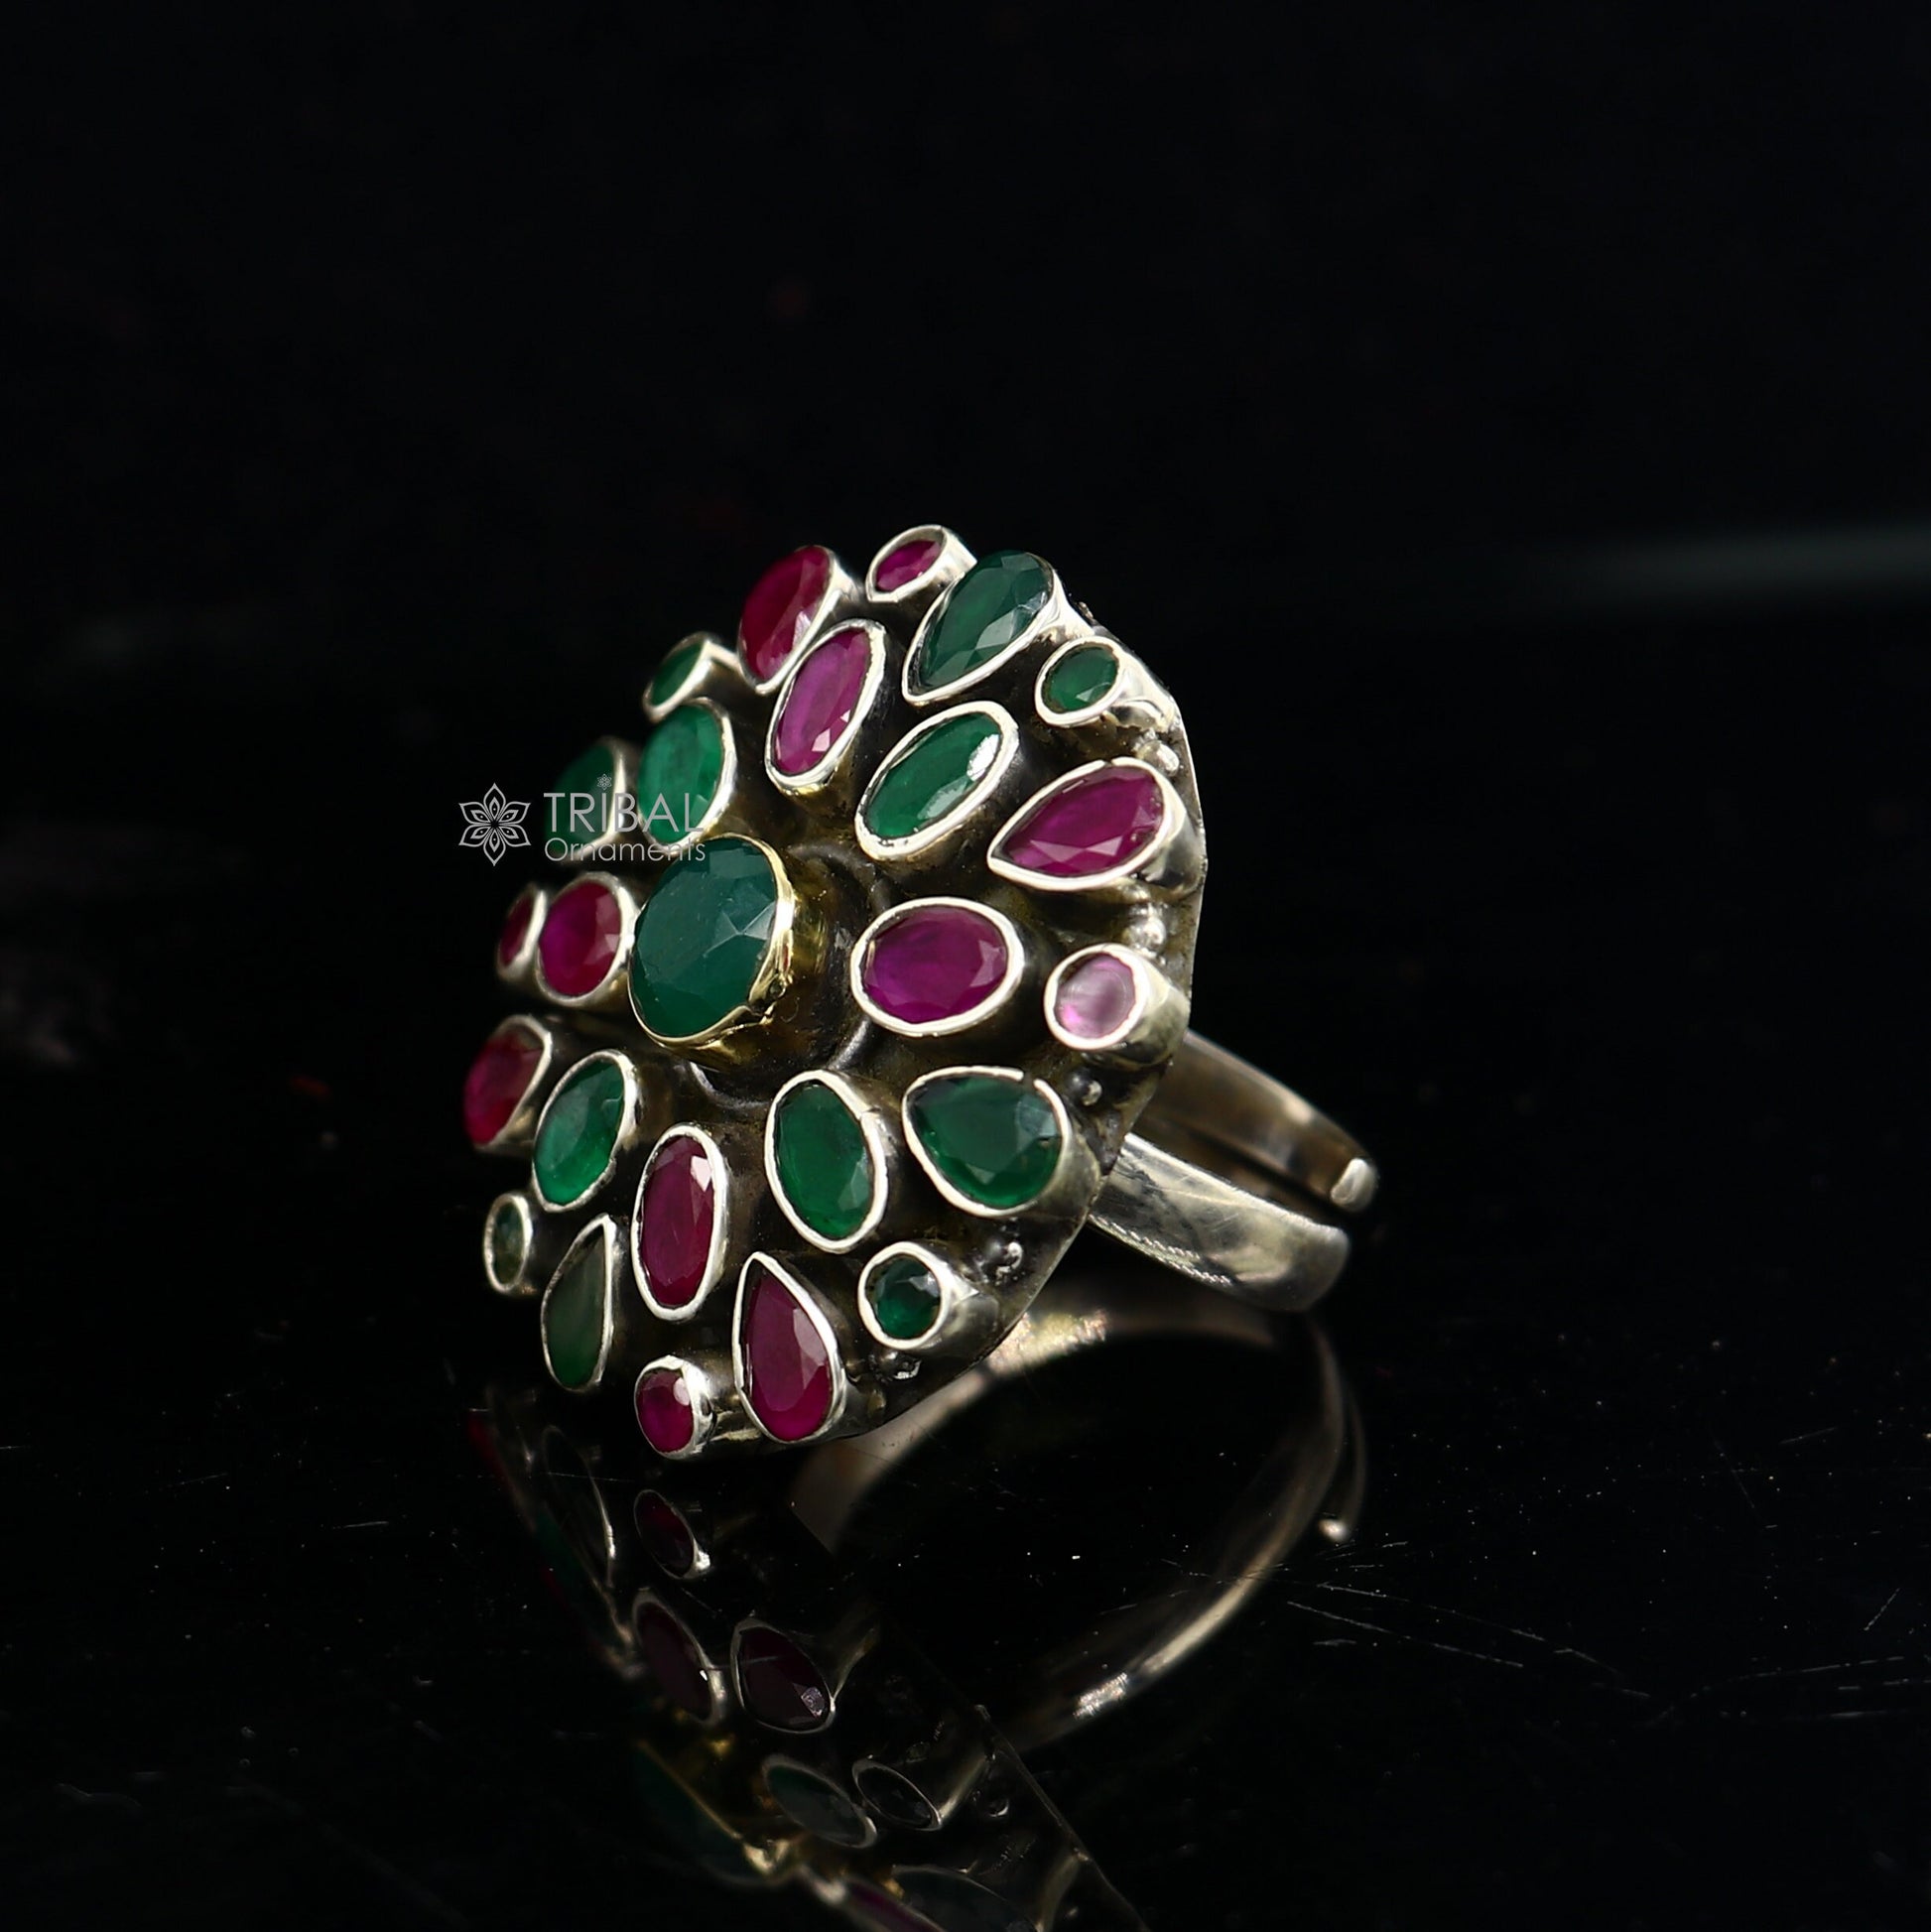 Green and red cut stone 925 sterling silver handmade silver charm ring band adjustable ring brides personalized jewelry sr405 - TRIBAL ORNAMENTS